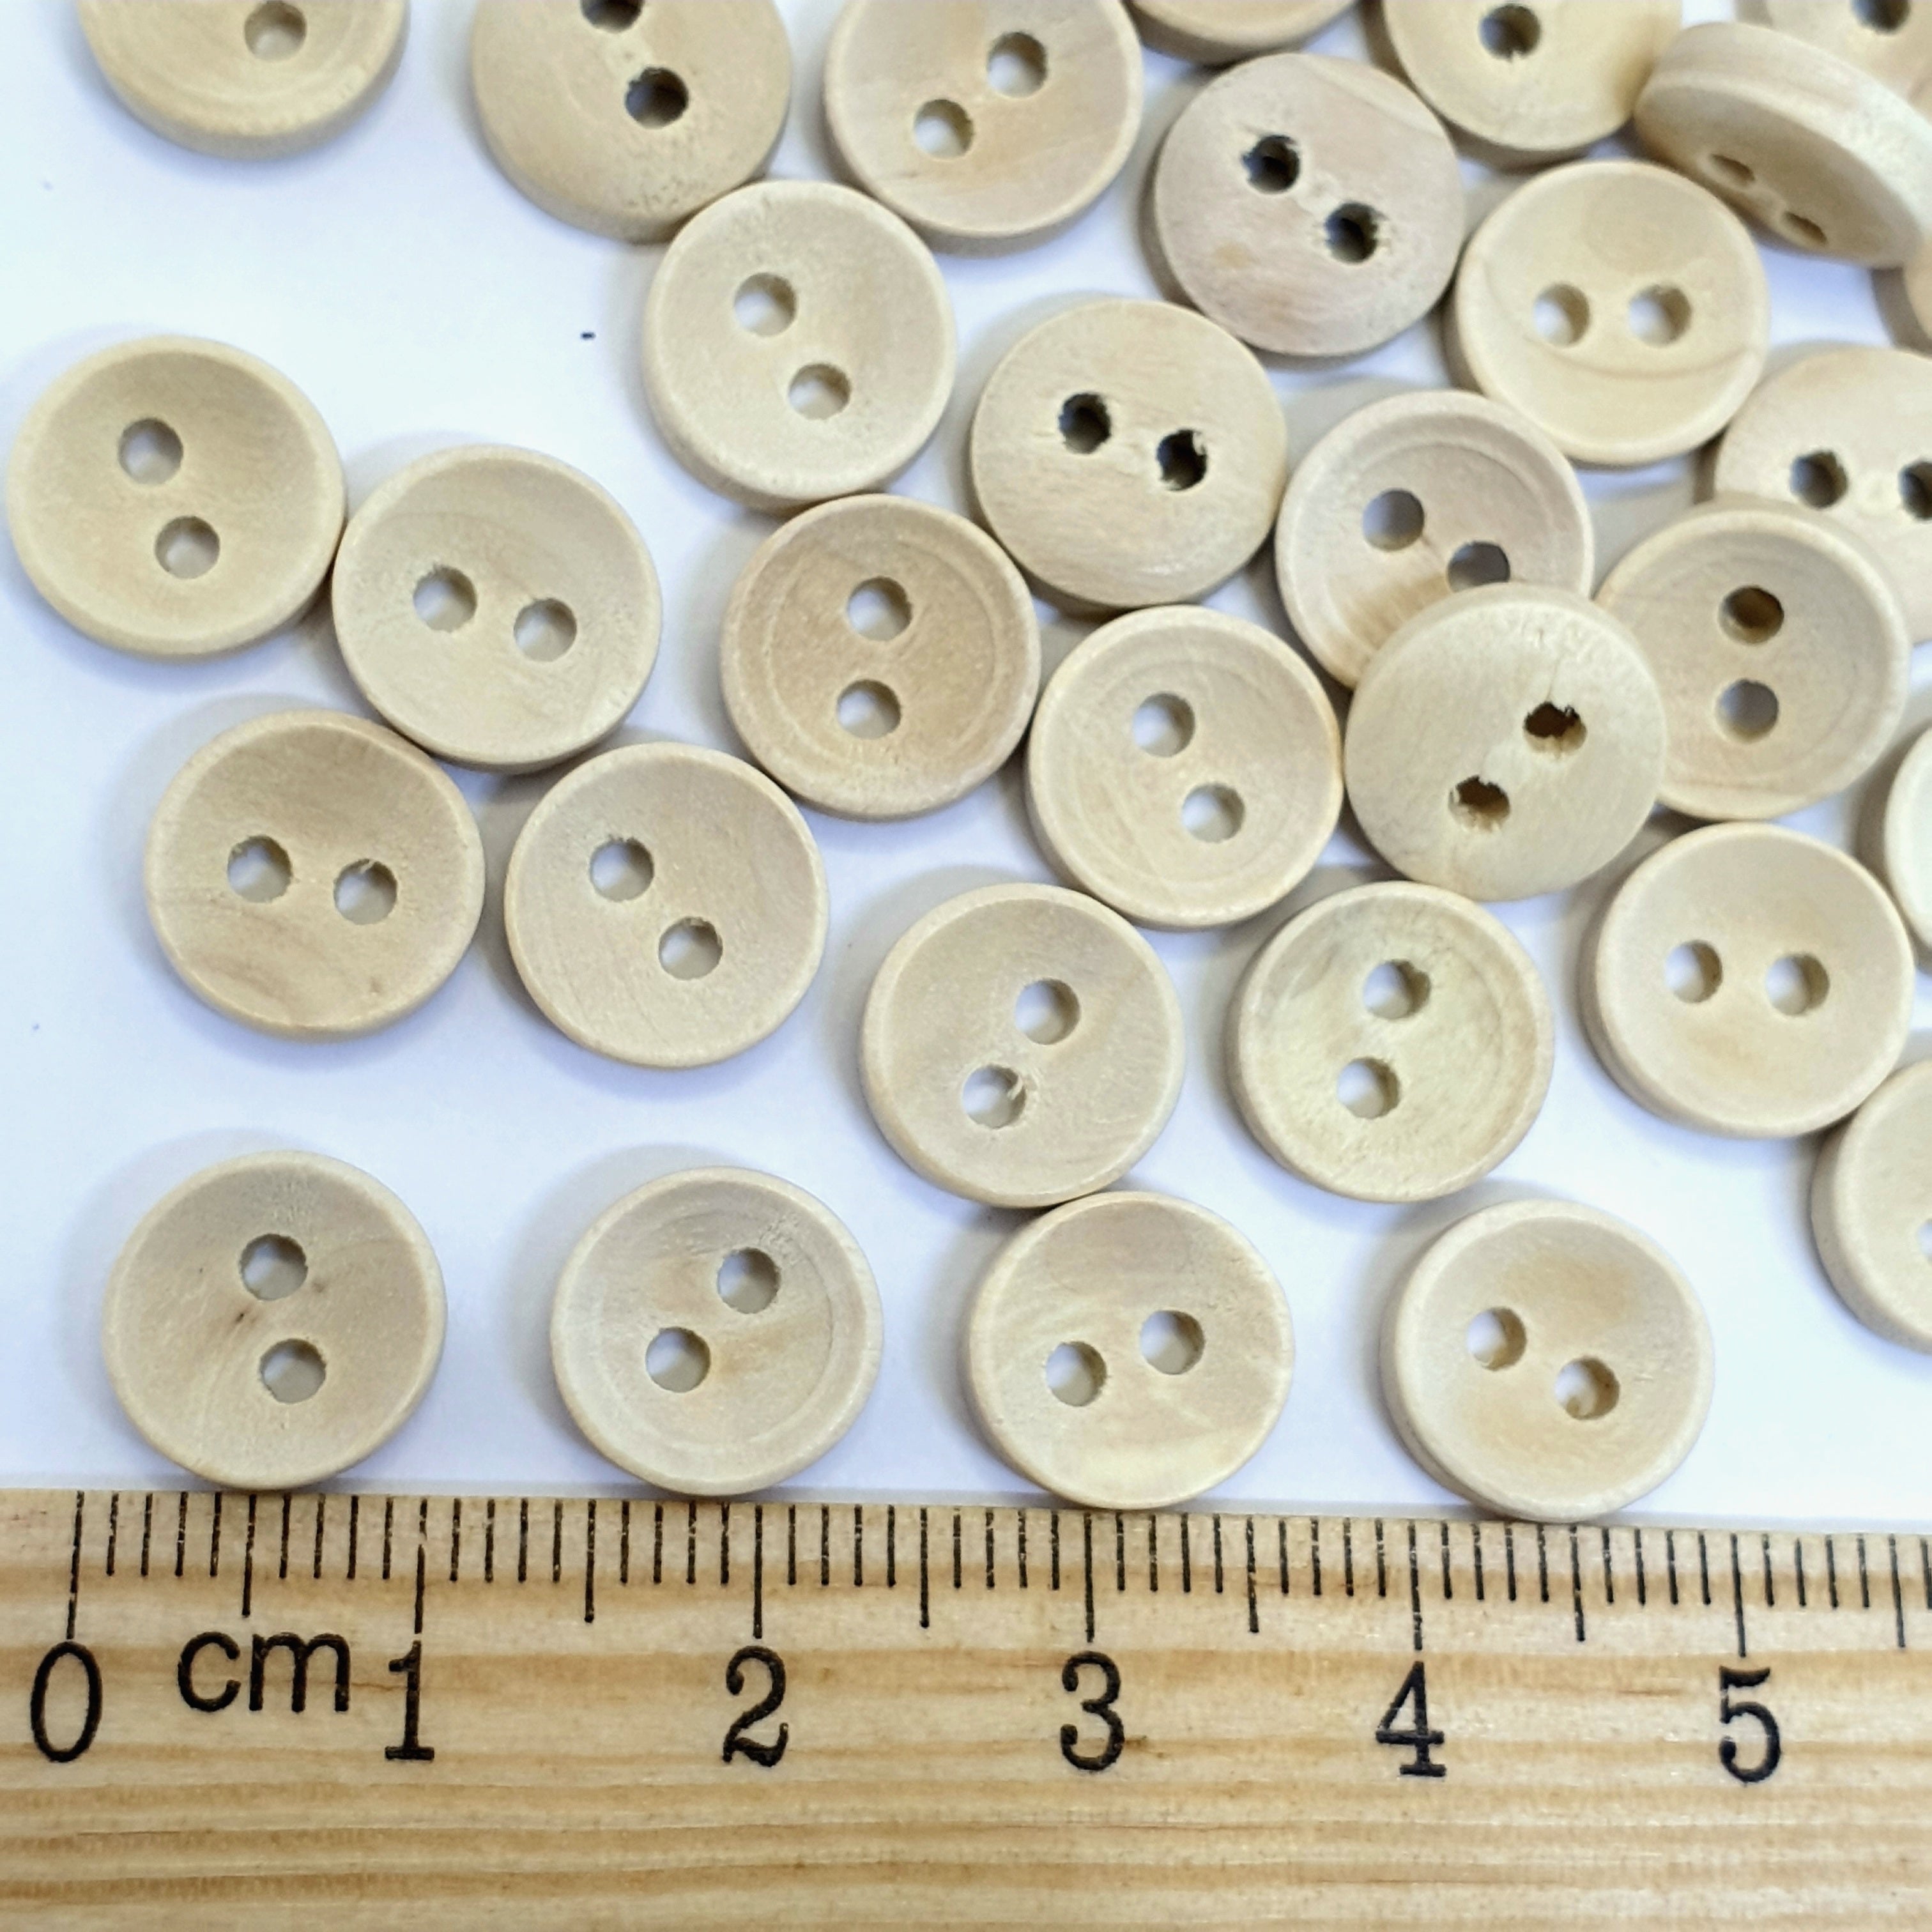 MajorCrafts 48pcs 10mm Light Brown Plain Round 2 Holes Small Wooden Sewing Buttons